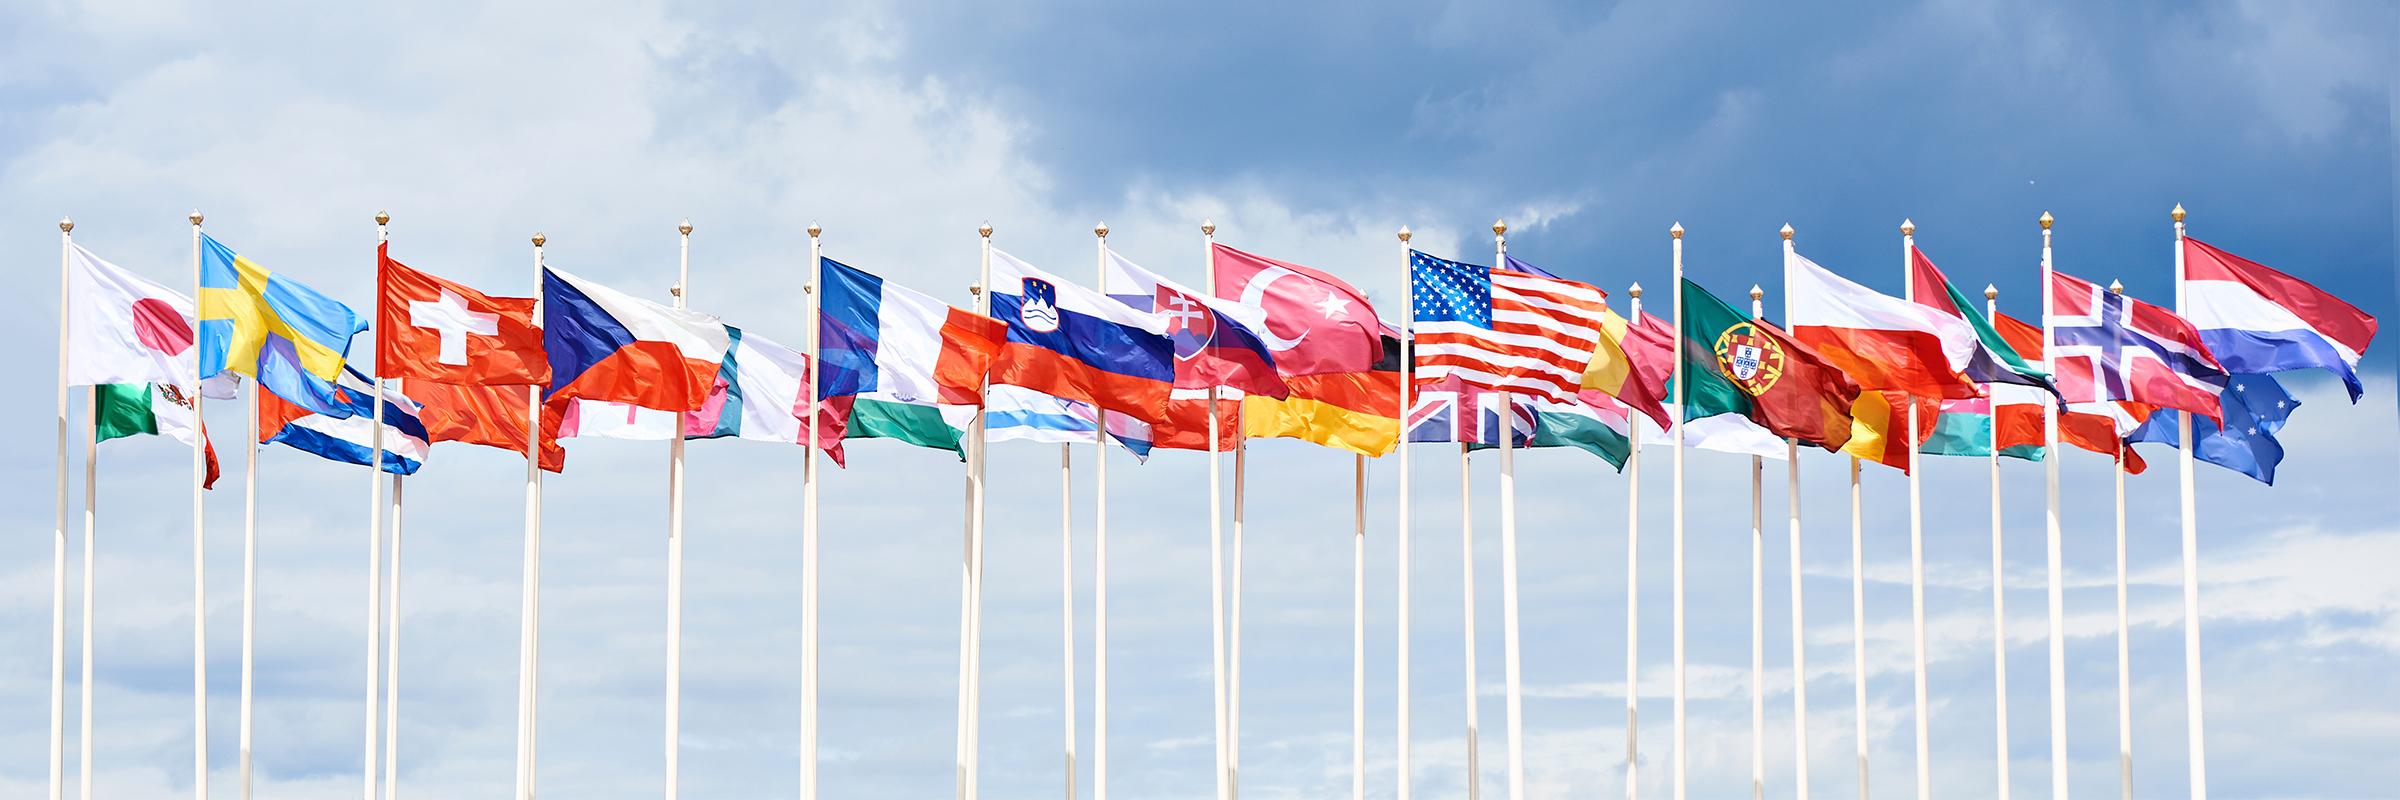 A line of international flags on poles in front of a blue sky.